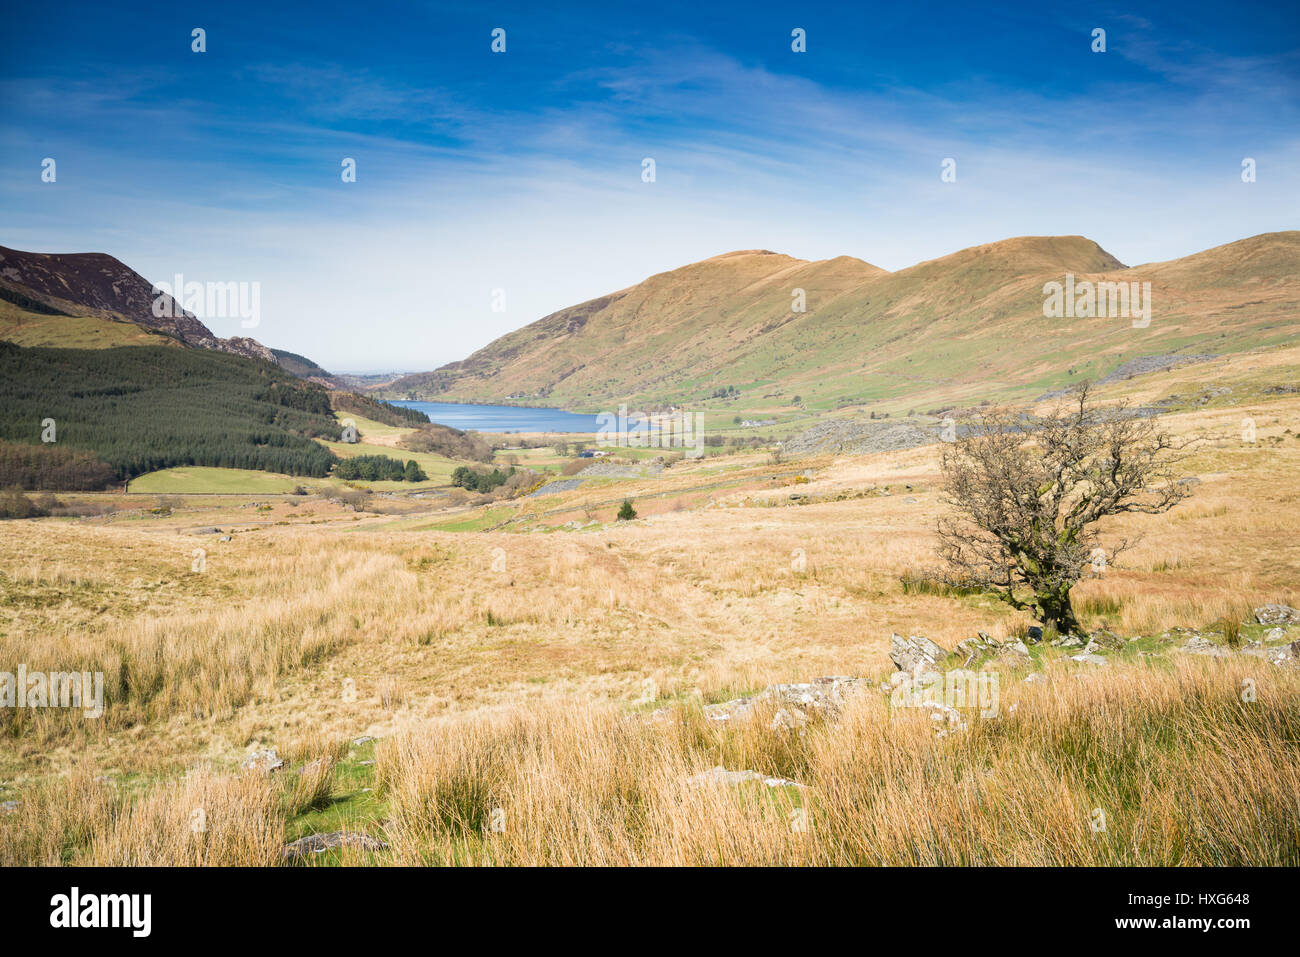 NORTH WALES, UK - MARCH 2017 - A VIEW OF THE BEDDGELERT AND RHYD-DDU VALLEY IN NORTH WALES WITH LAKES AND A TREE IN THE FOREGROUND Stock Photo